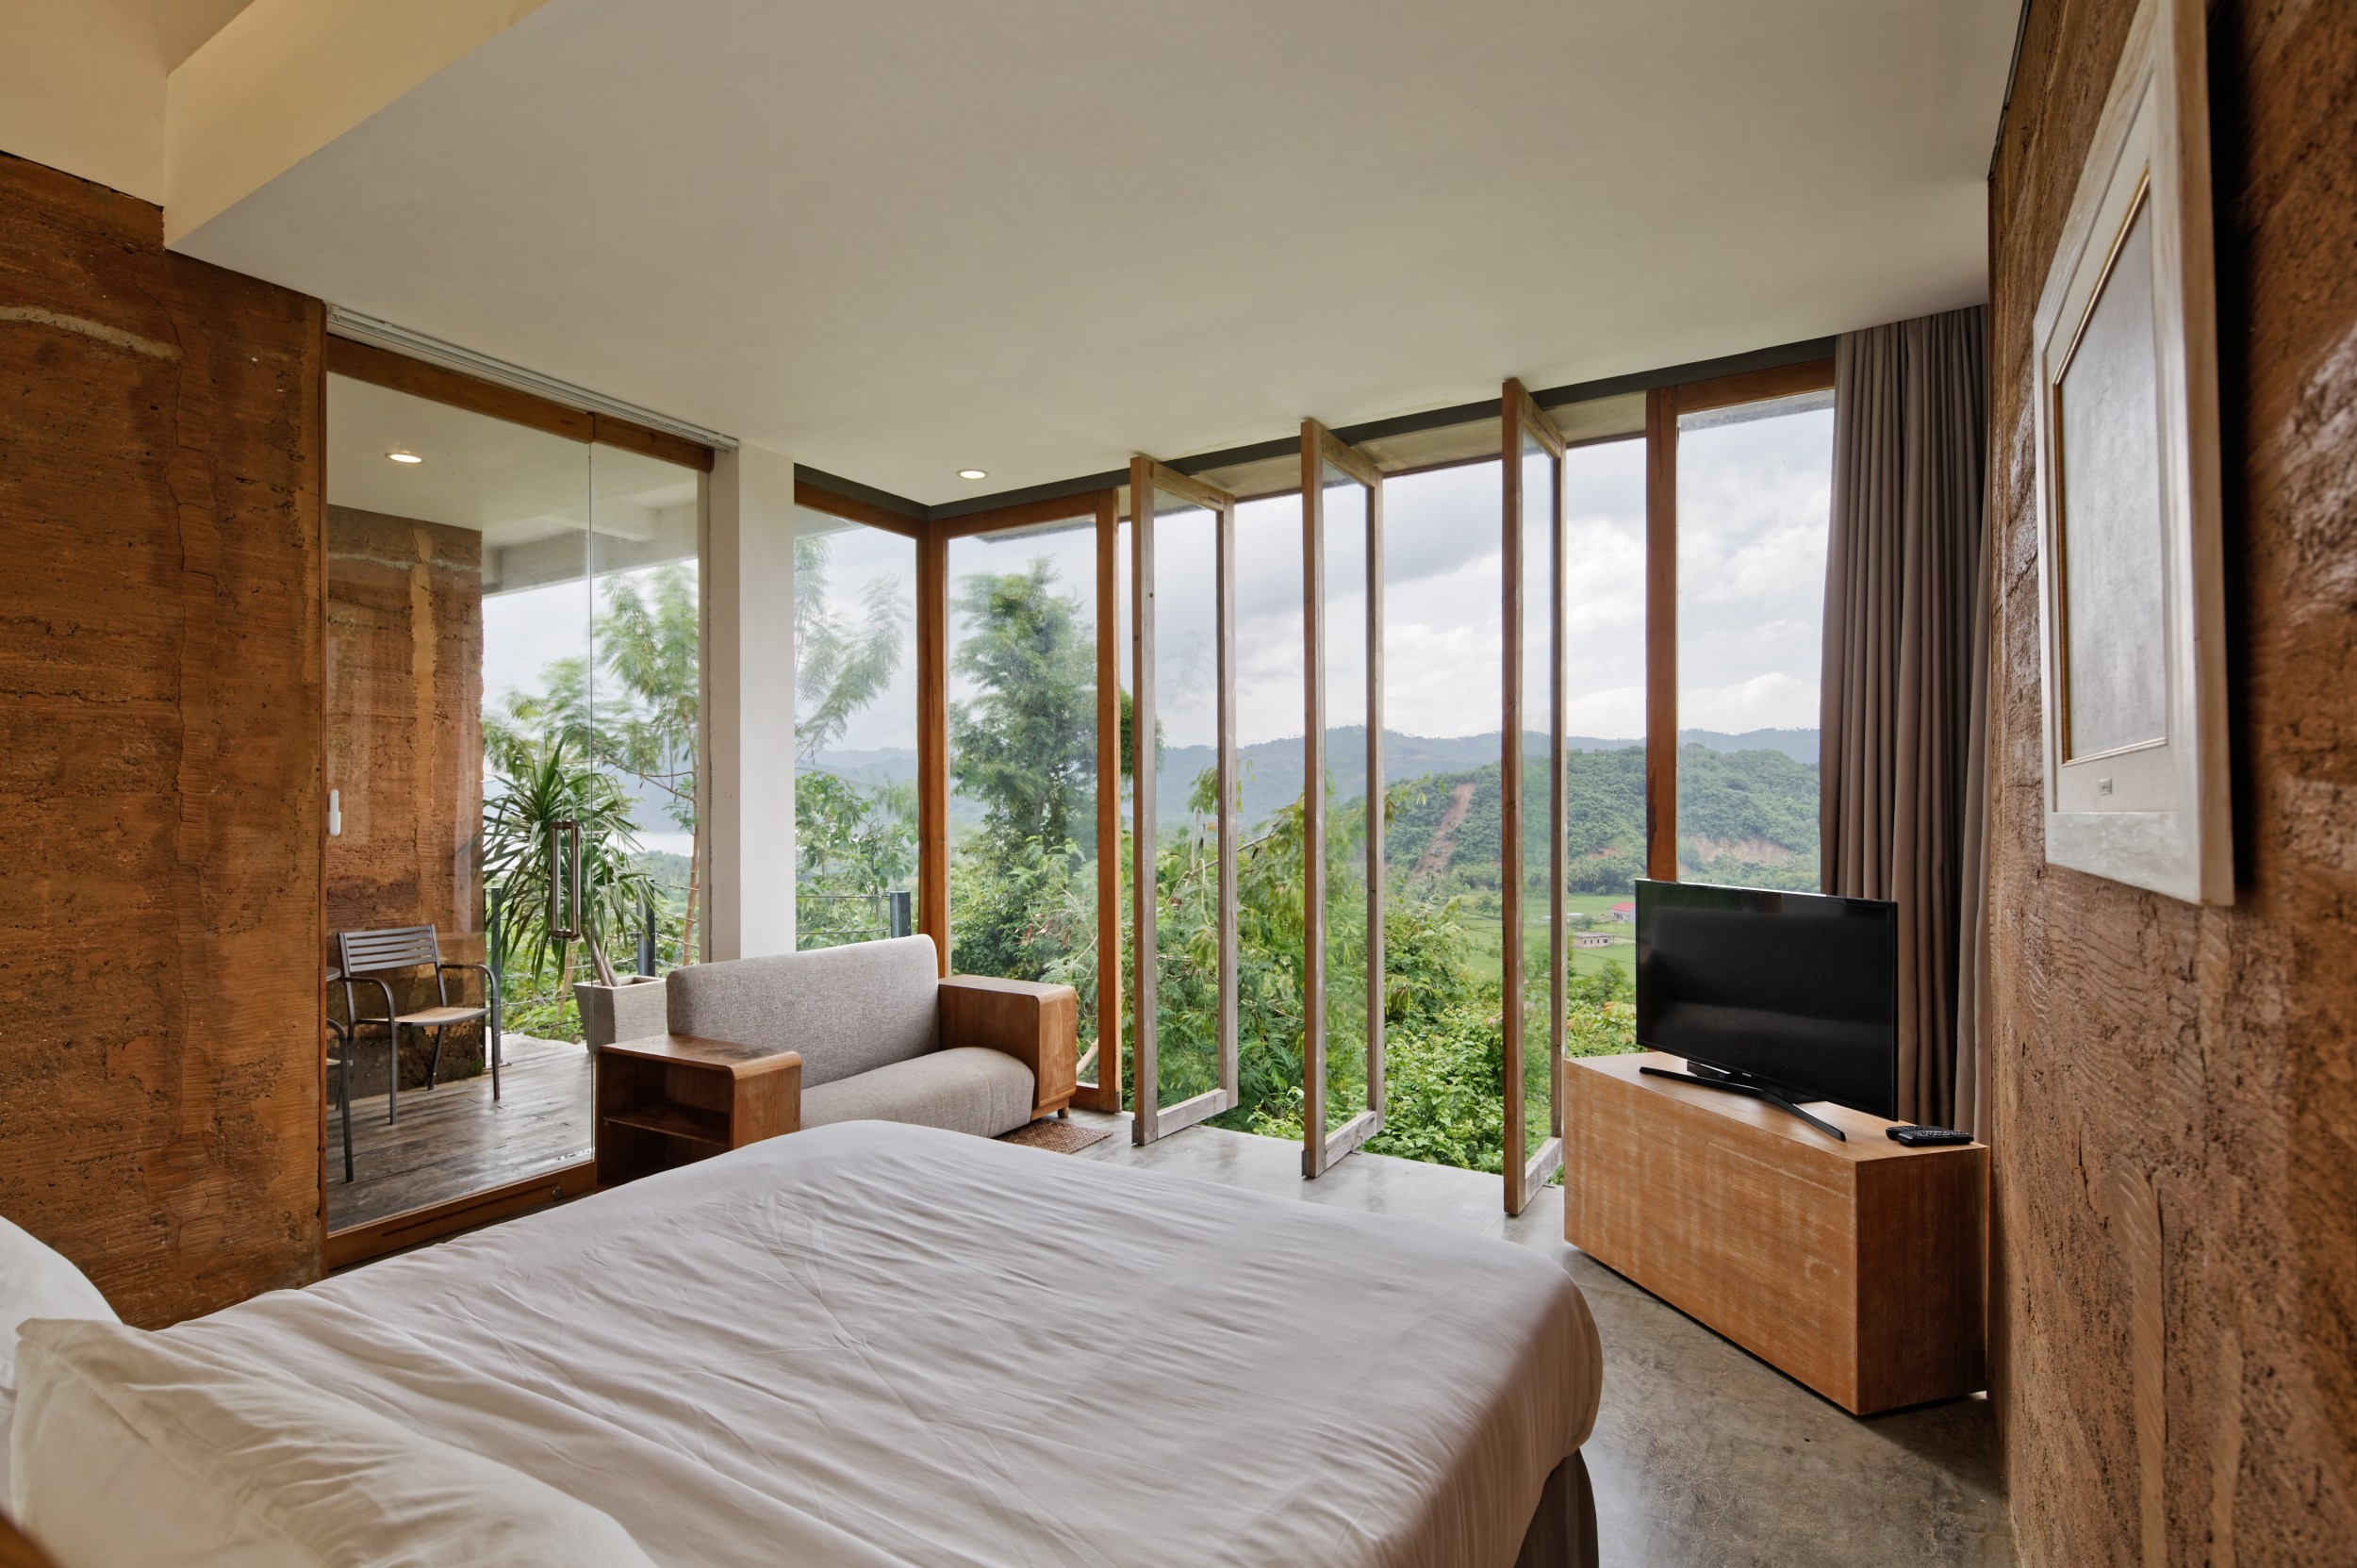 View from a bedroom in the Lombok eco villa